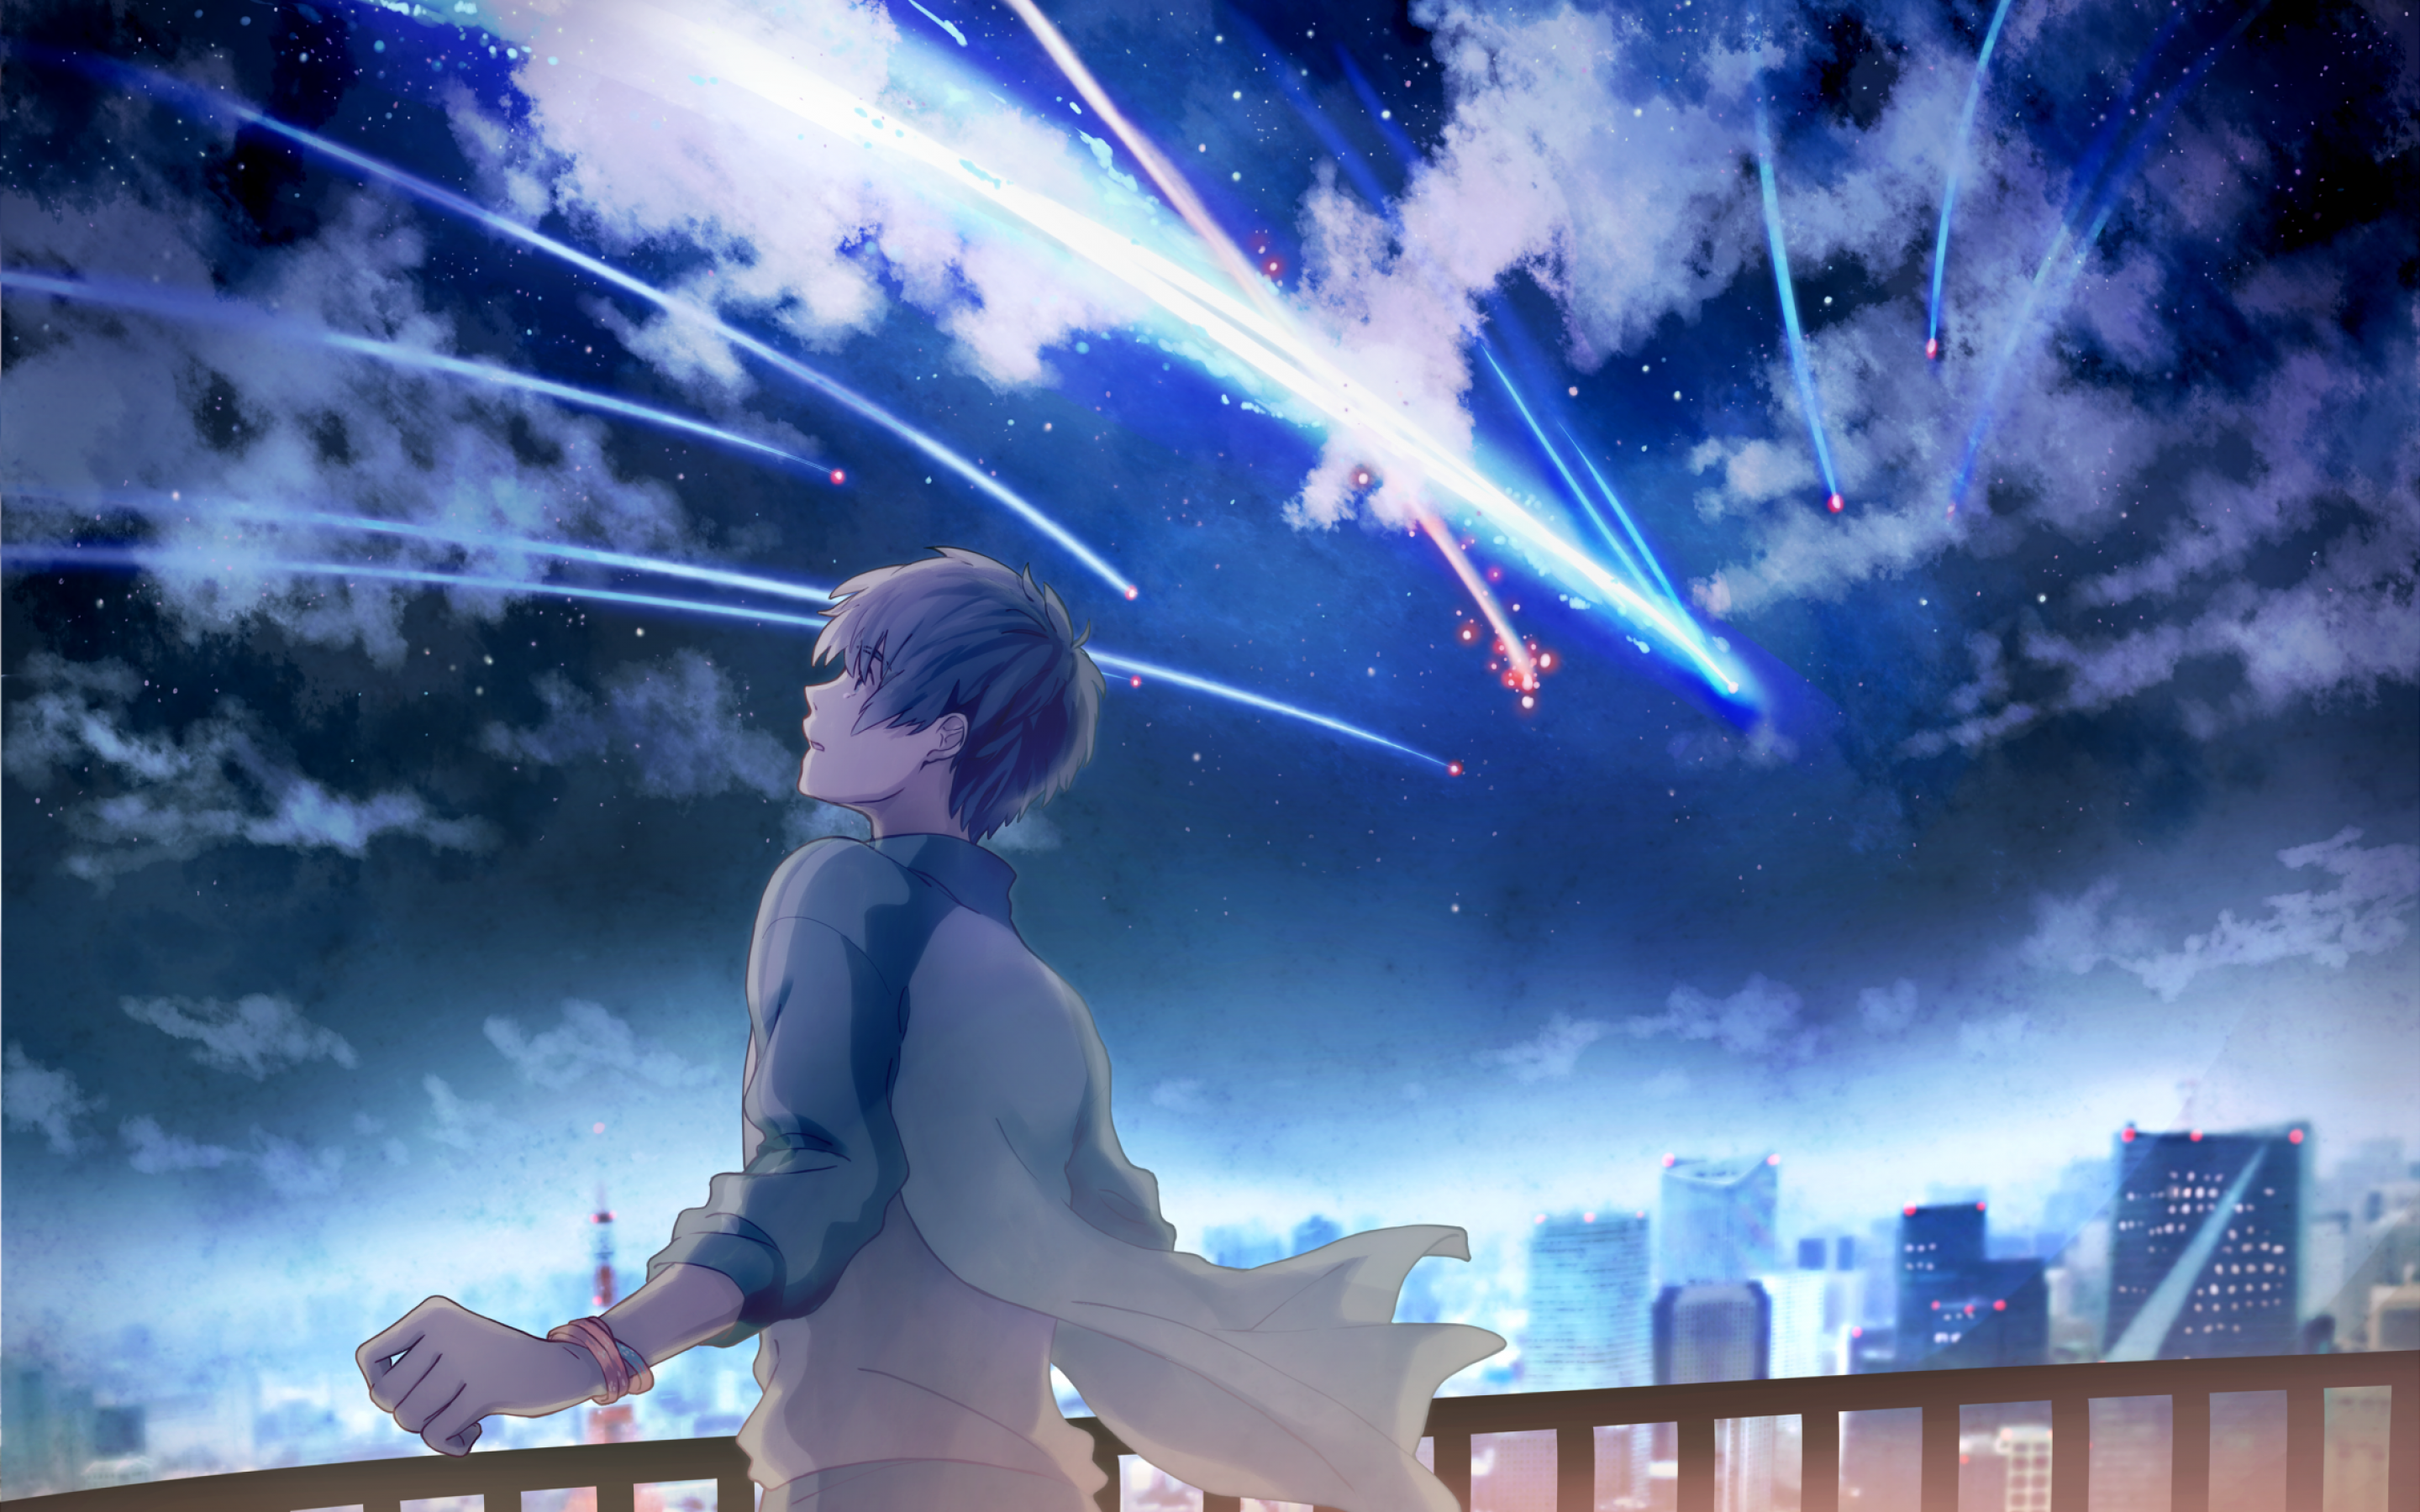 your name wallpaper,sky,atmosphere,space,cg artwork,fictional character